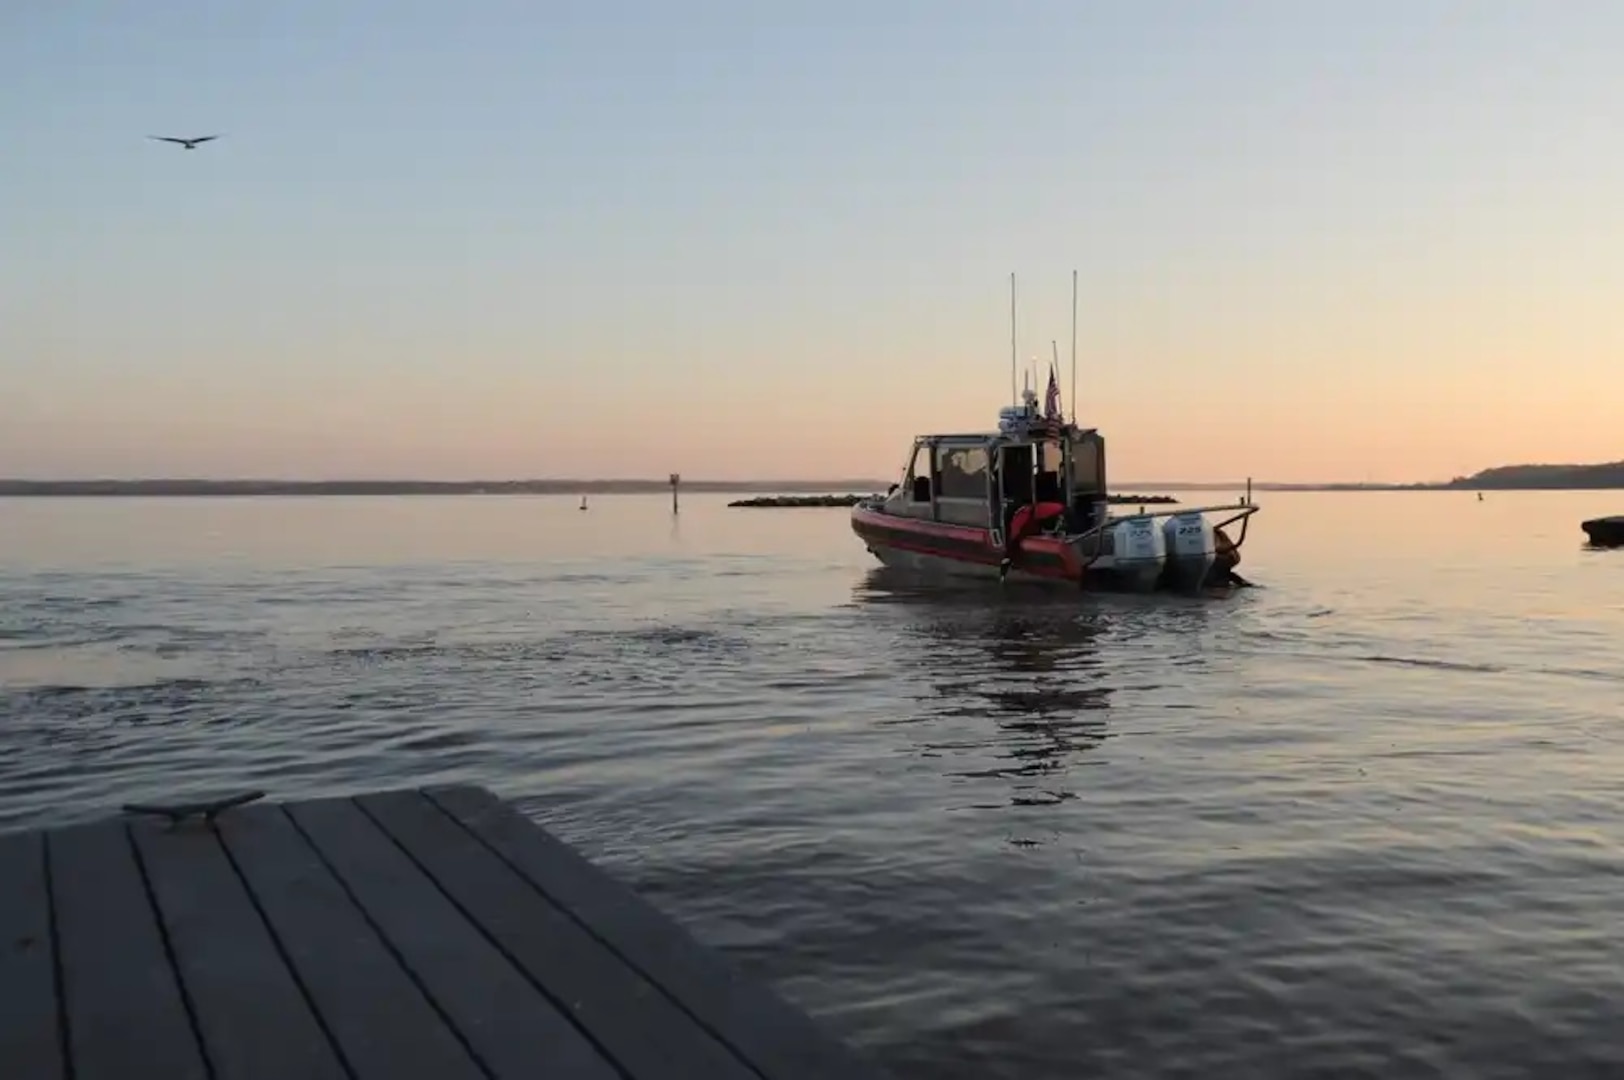 A boat crew from Coast Guard Station Washington prepares to dock at Leesylvania State Park, Woodbridge, Va., Nov. 17, 2018. The crew members, who are all members of the Coast Guard Reserve, conducted the training mission and patrol that took them to the southern part of their station’s area of responsibility. (Coast Guard photo by Petty Officer 2nd Class Lisa Ferdinando)